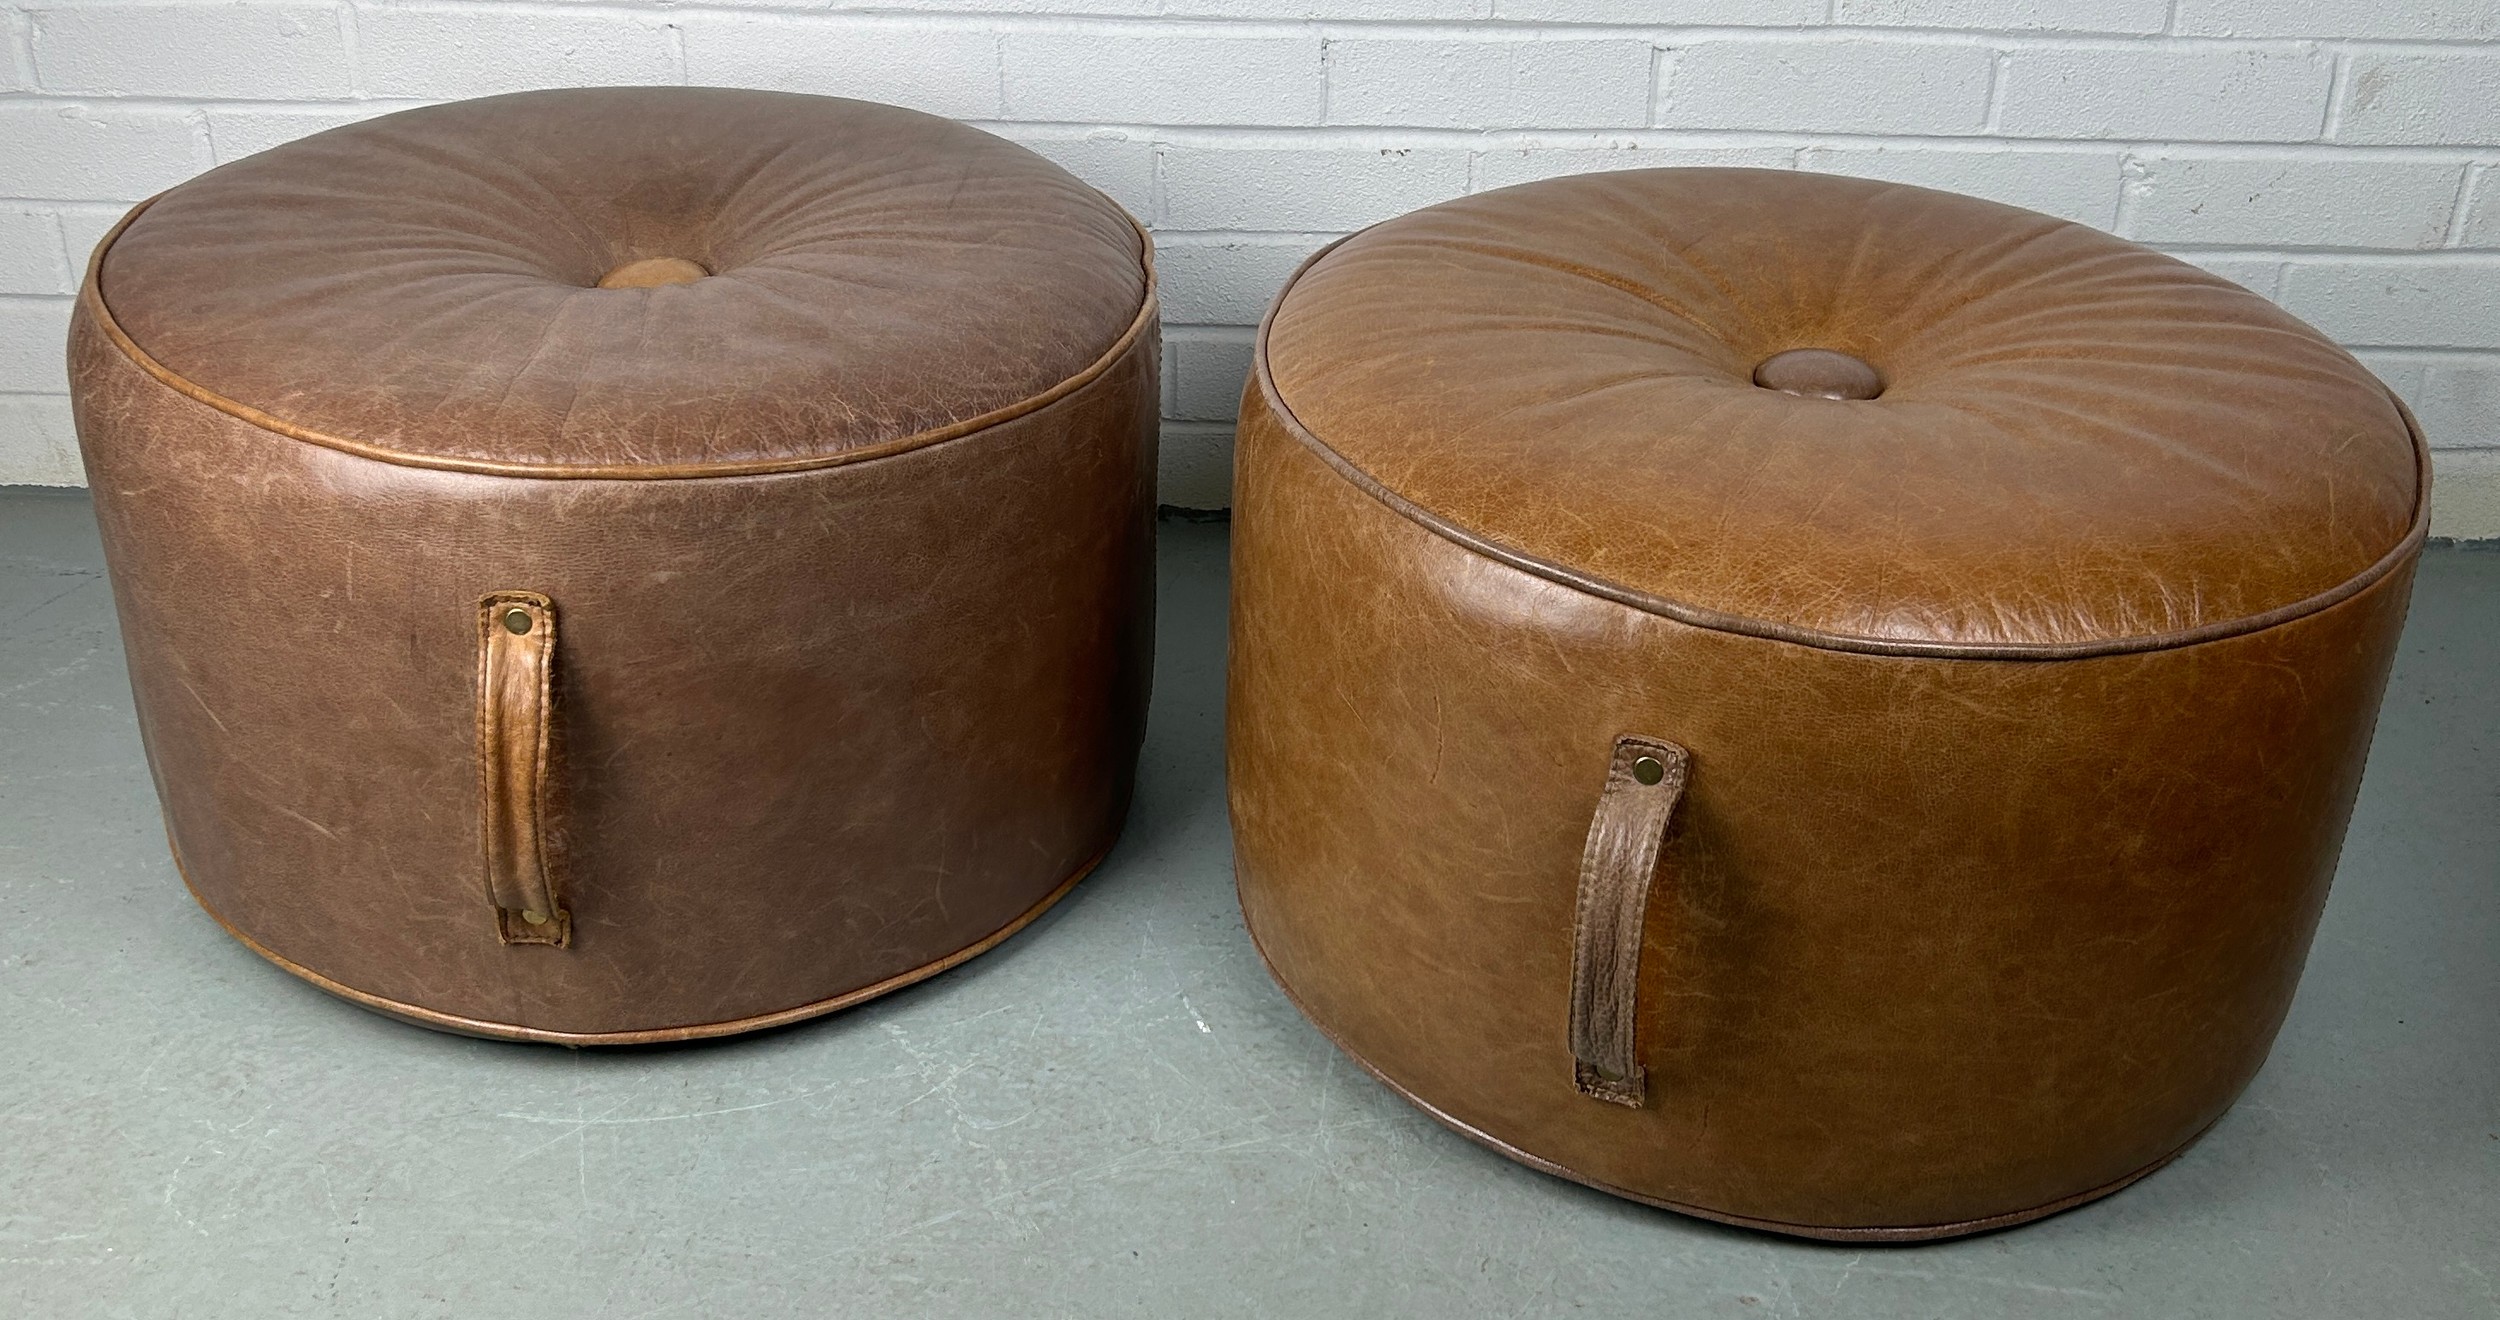 A PAIR OF HEALS CIRCULAR STOOLS OR POUFFES UPHOLSTERED IN TAN LEATHER, 60cm x 35cm each. - Image 2 of 3